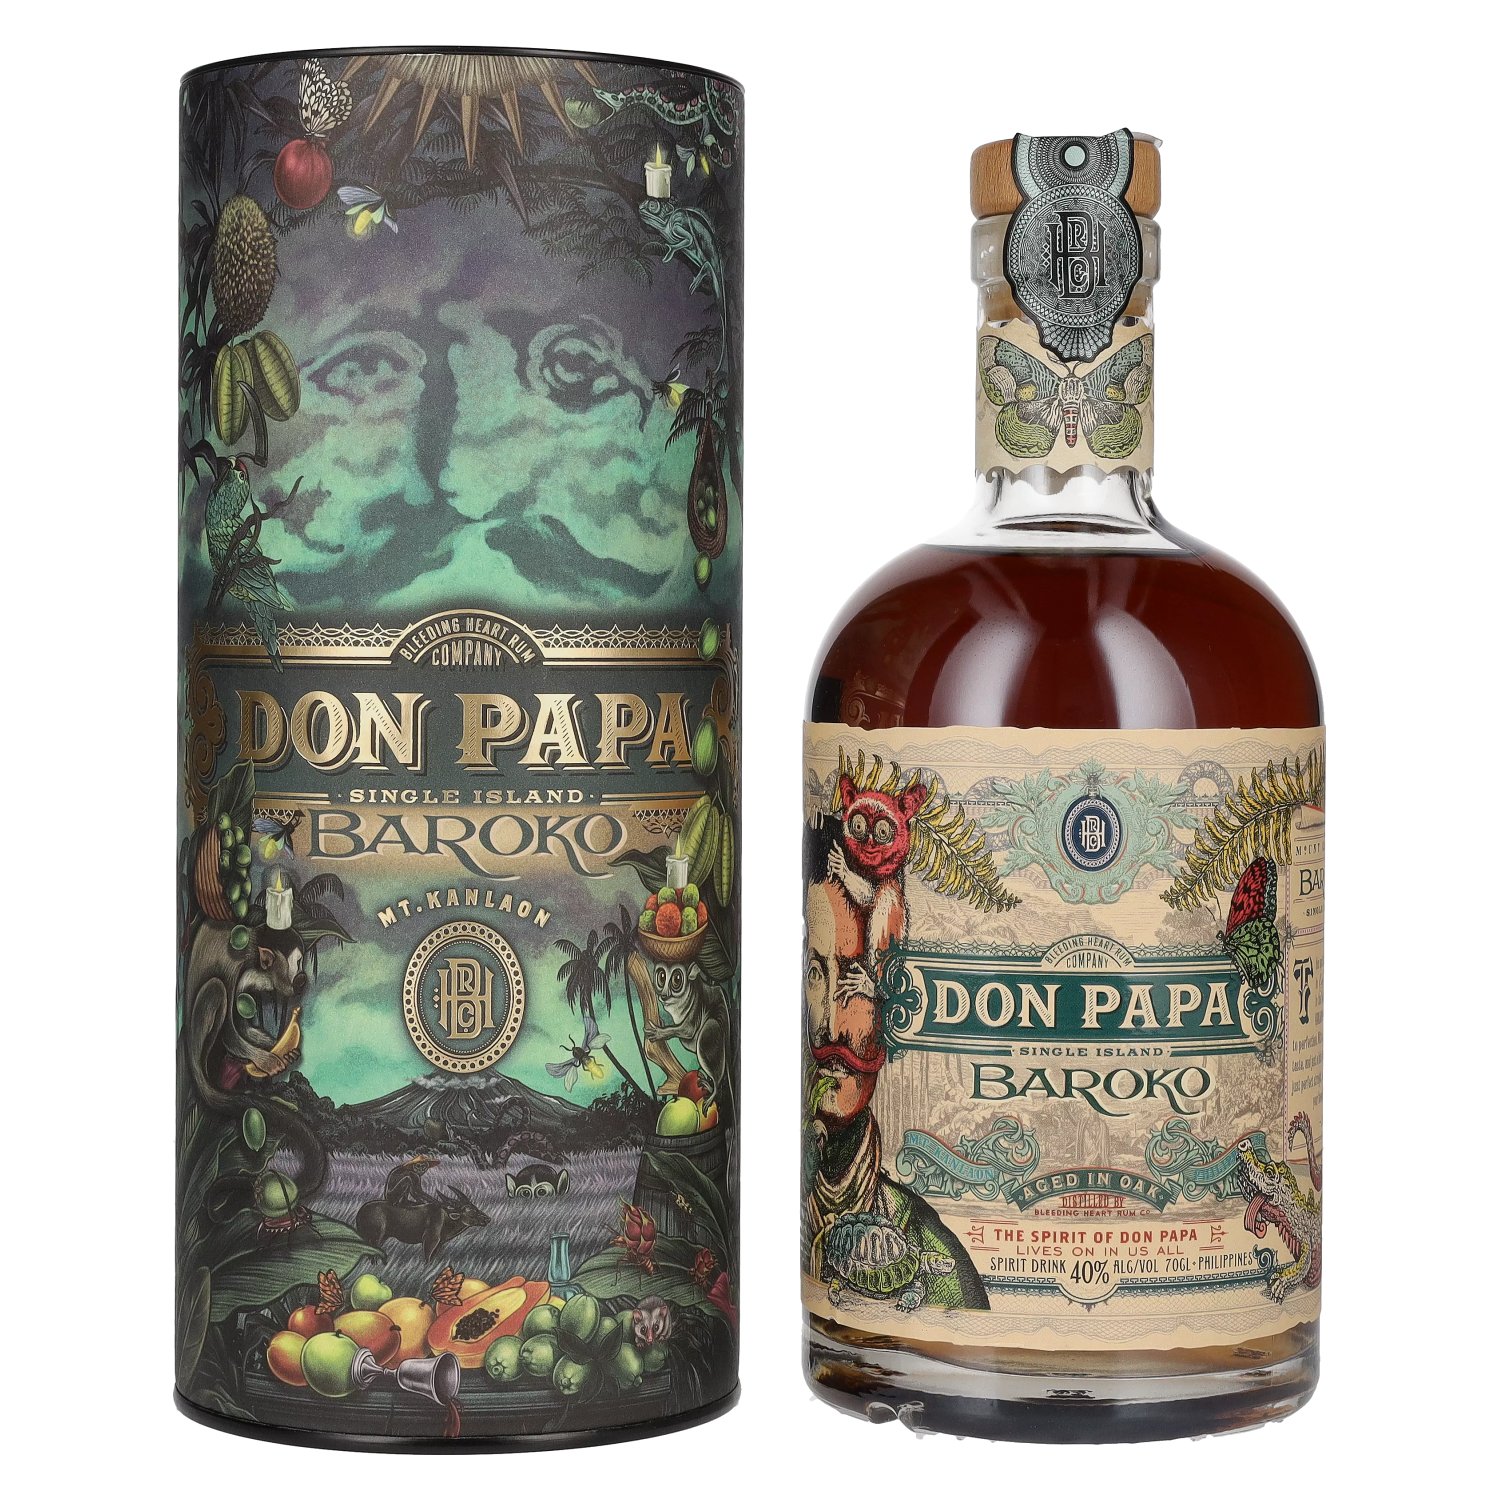 Don Papa BAROKO Limited Edition Harvest Canister 40% Vol. 0,7l in Giftbox | Weitere Spirituosen